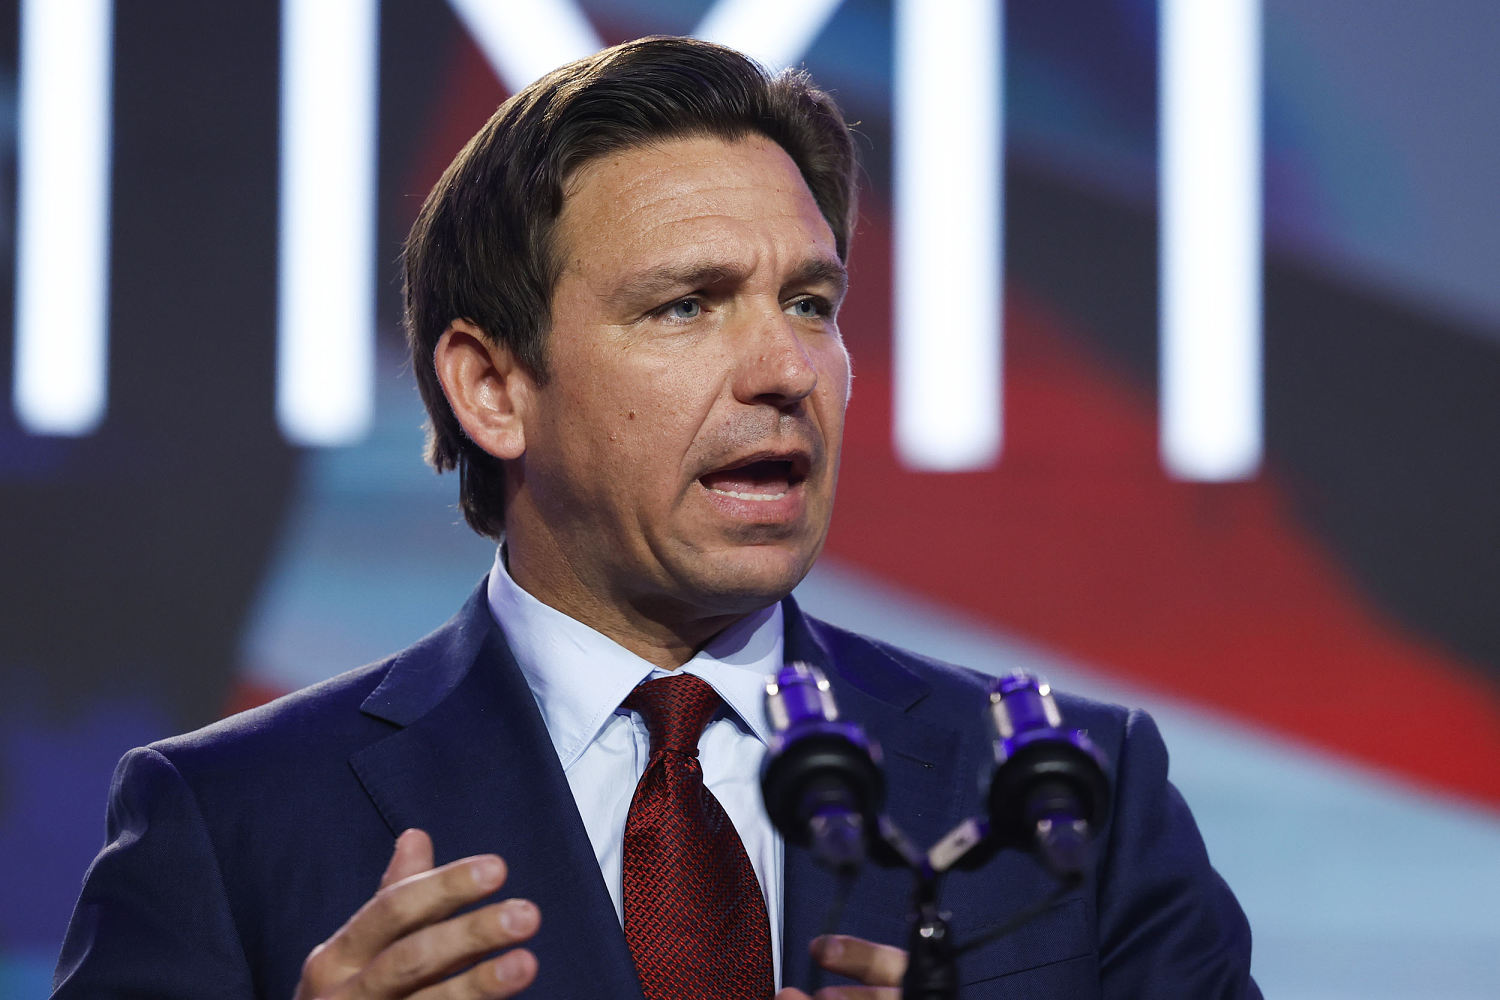 Ron DeSantis’ team was going after Nikki Haley. They turned on each other instead.